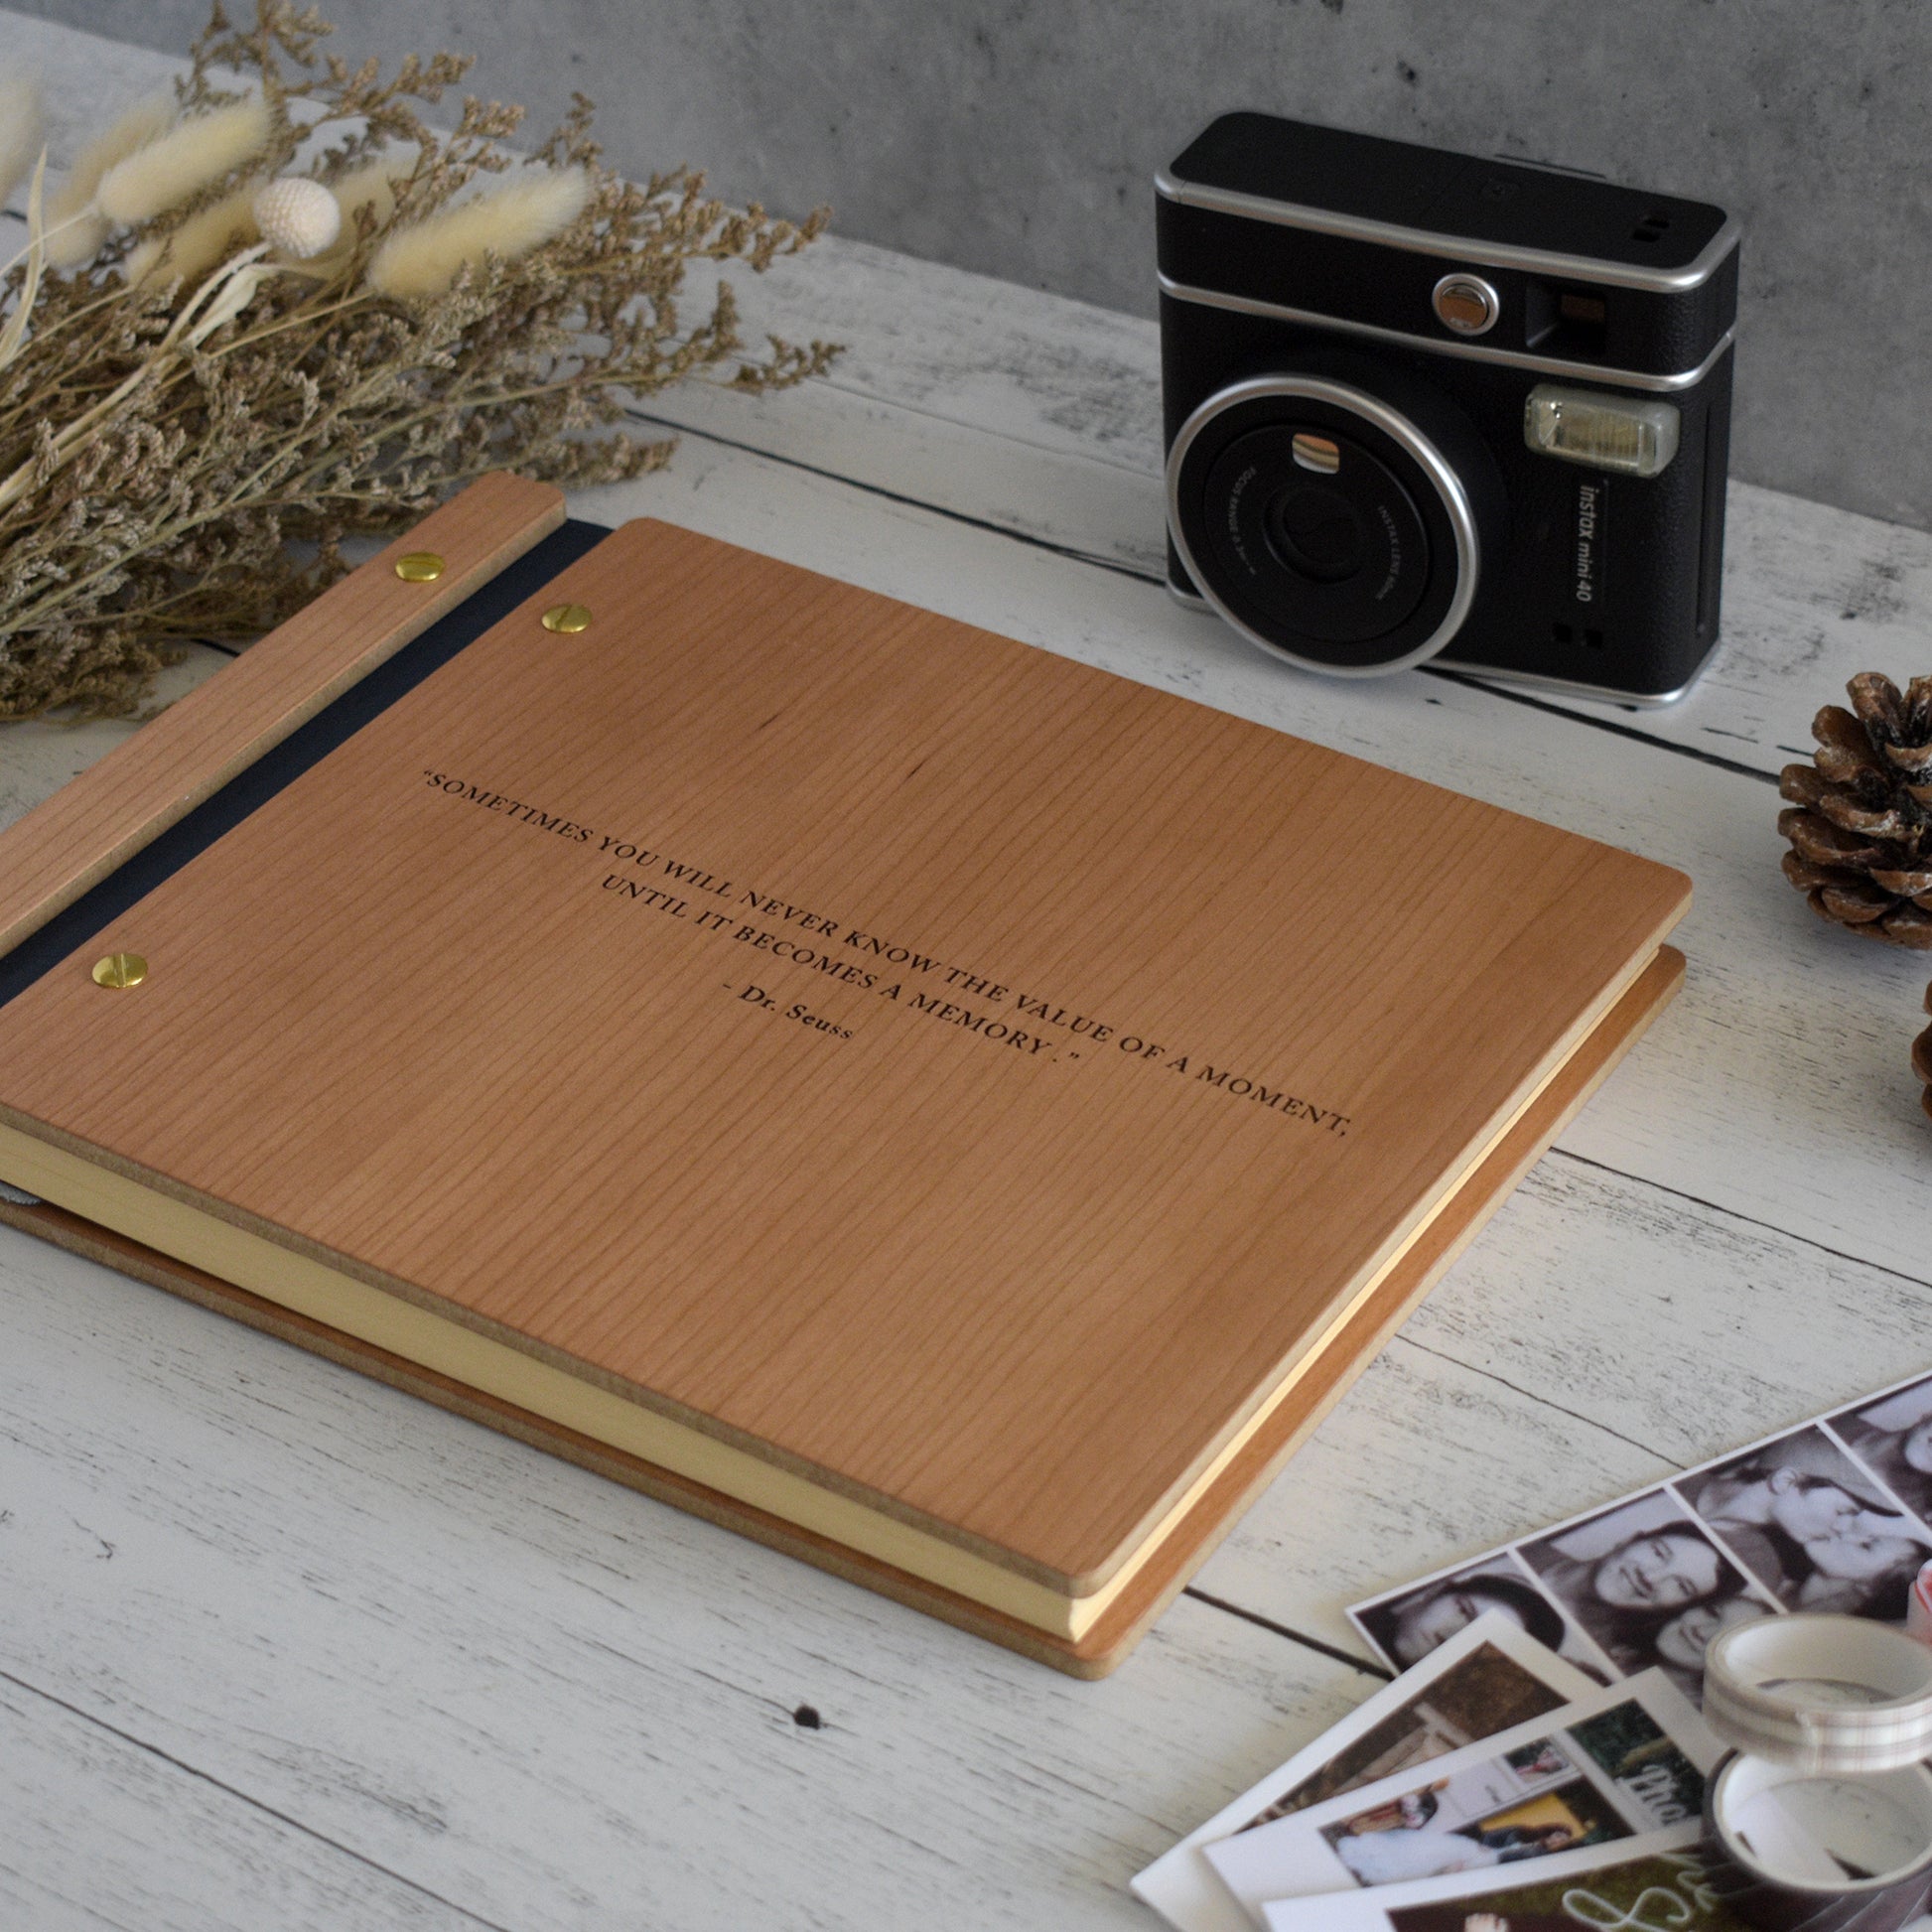 An 8.5x11" guest book lies on a table. Made of cherry wood, navy vegan leather binding, and gold hardware. The front cover includes an engraved design with a personalized quote.